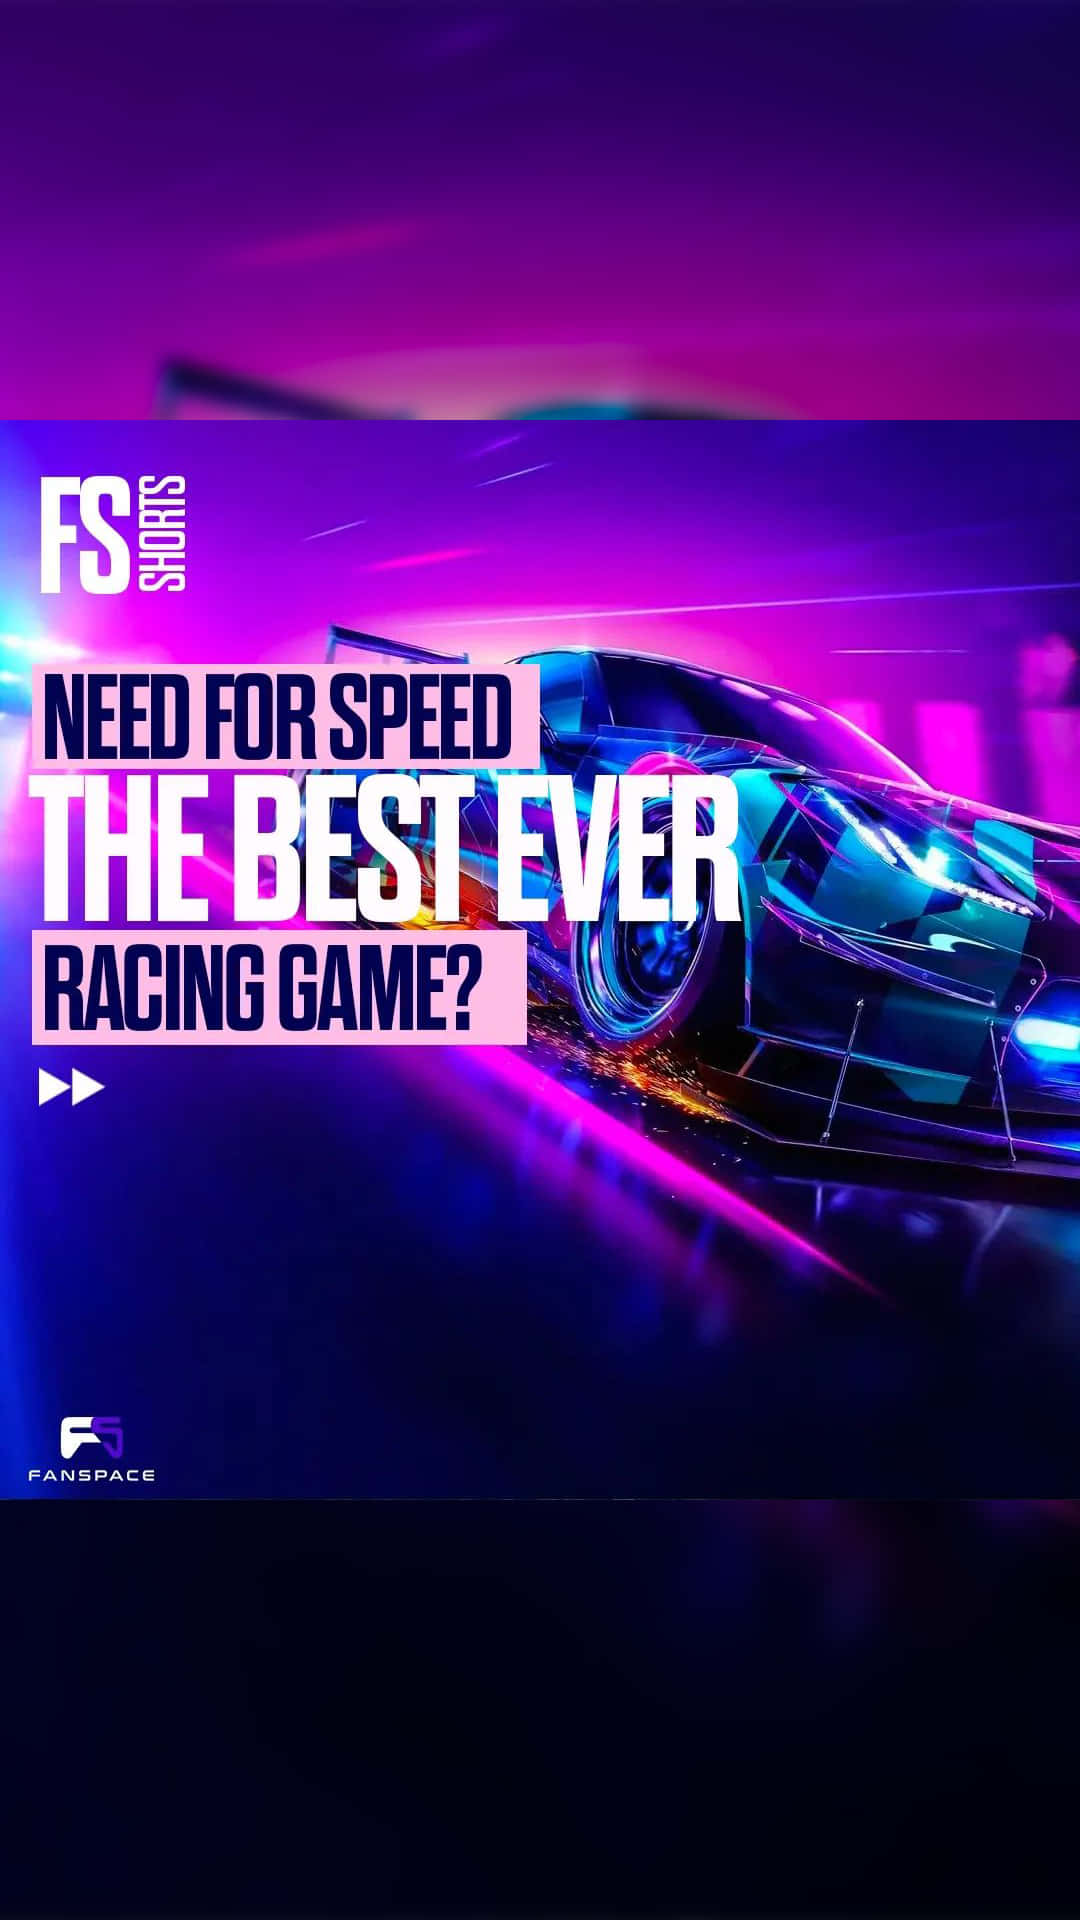 Need For Speed The Best Ever Racing Game?